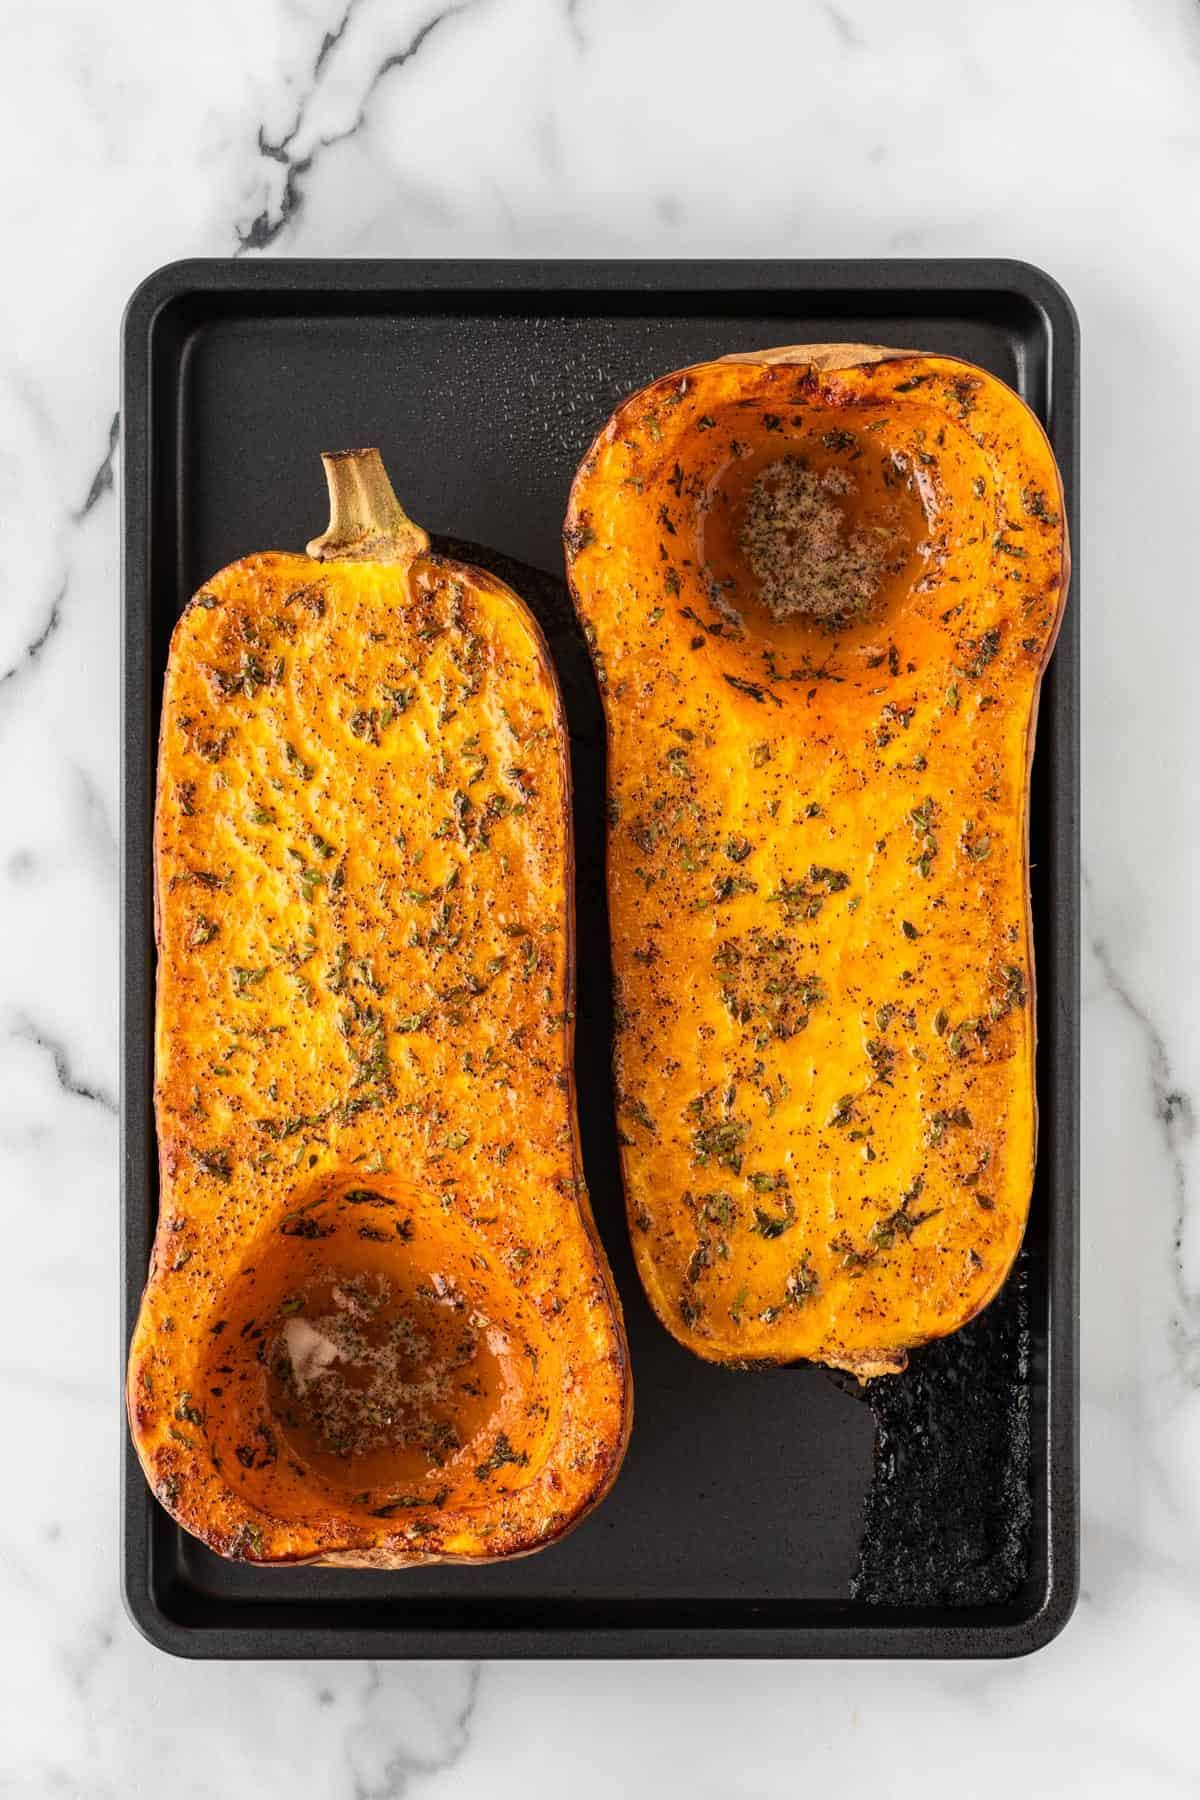 A photo of two roasted butternut squash halves next to each other on a baking sheet.